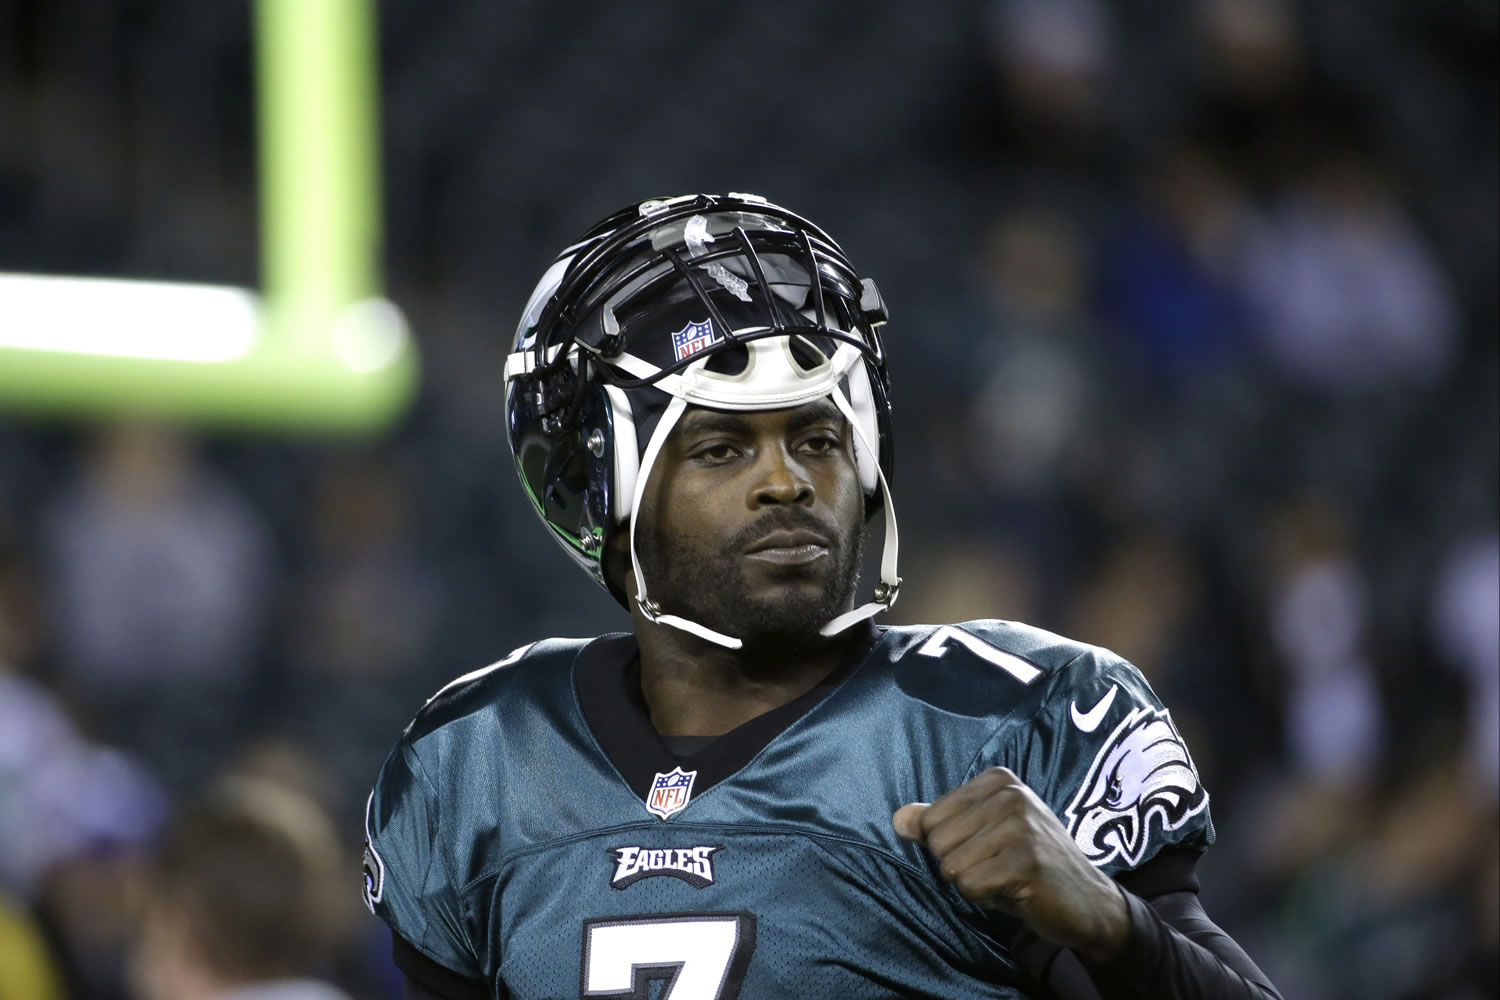 Quarterback Michael Vick has joined the New York Jets.